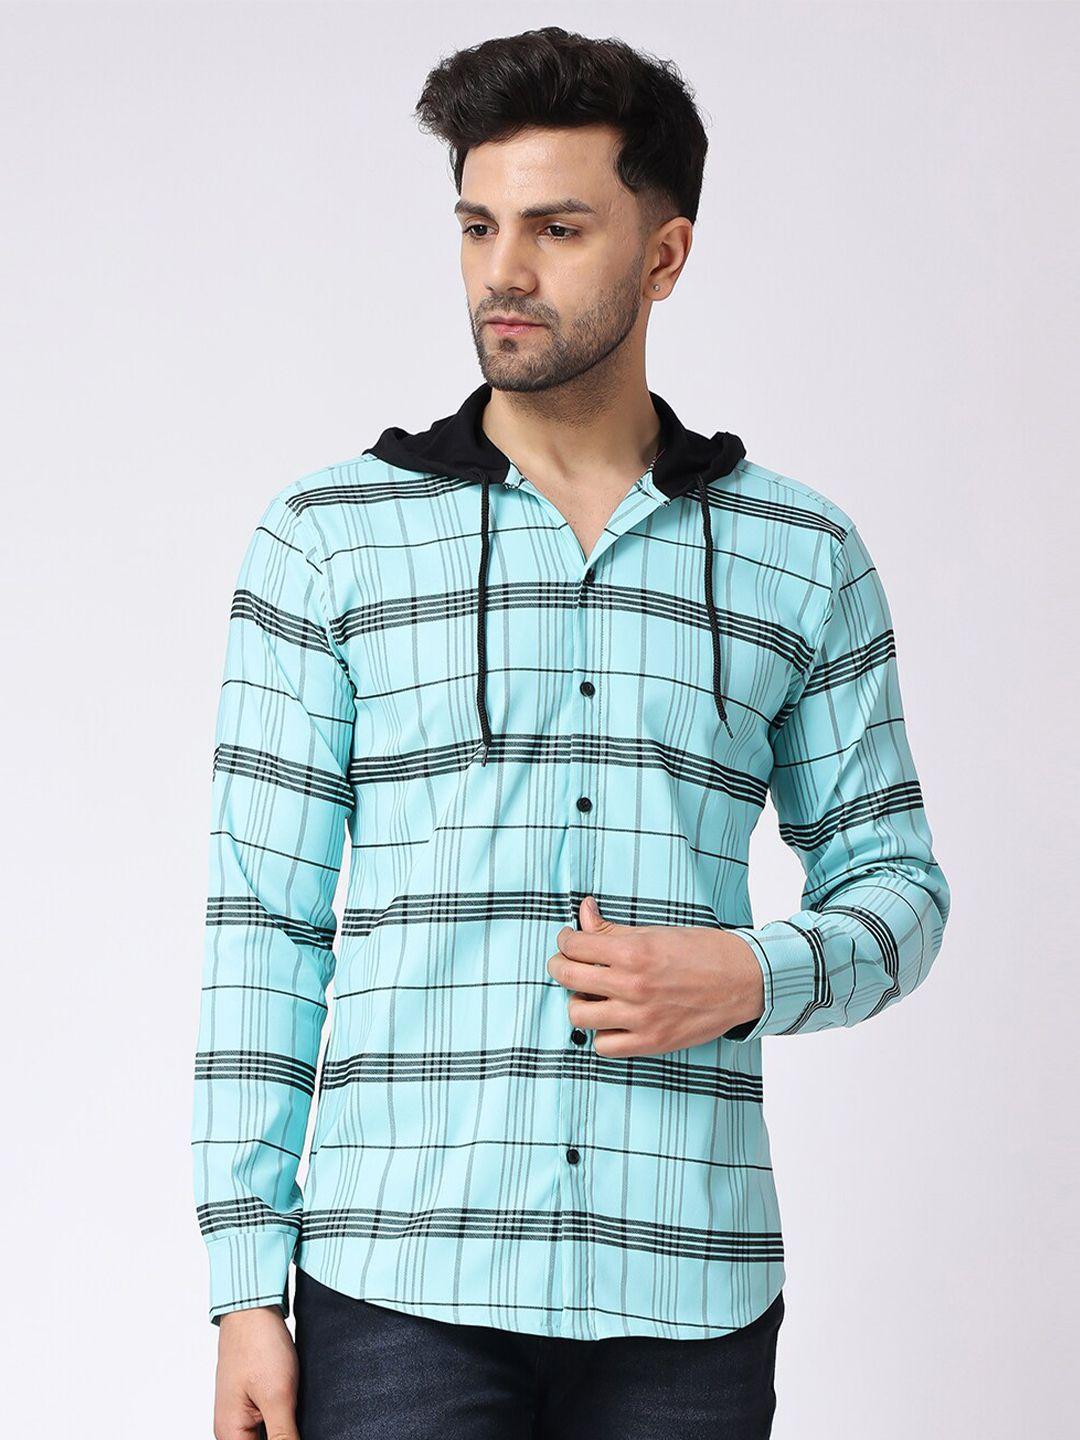 voroxy hooded checked casual shirt